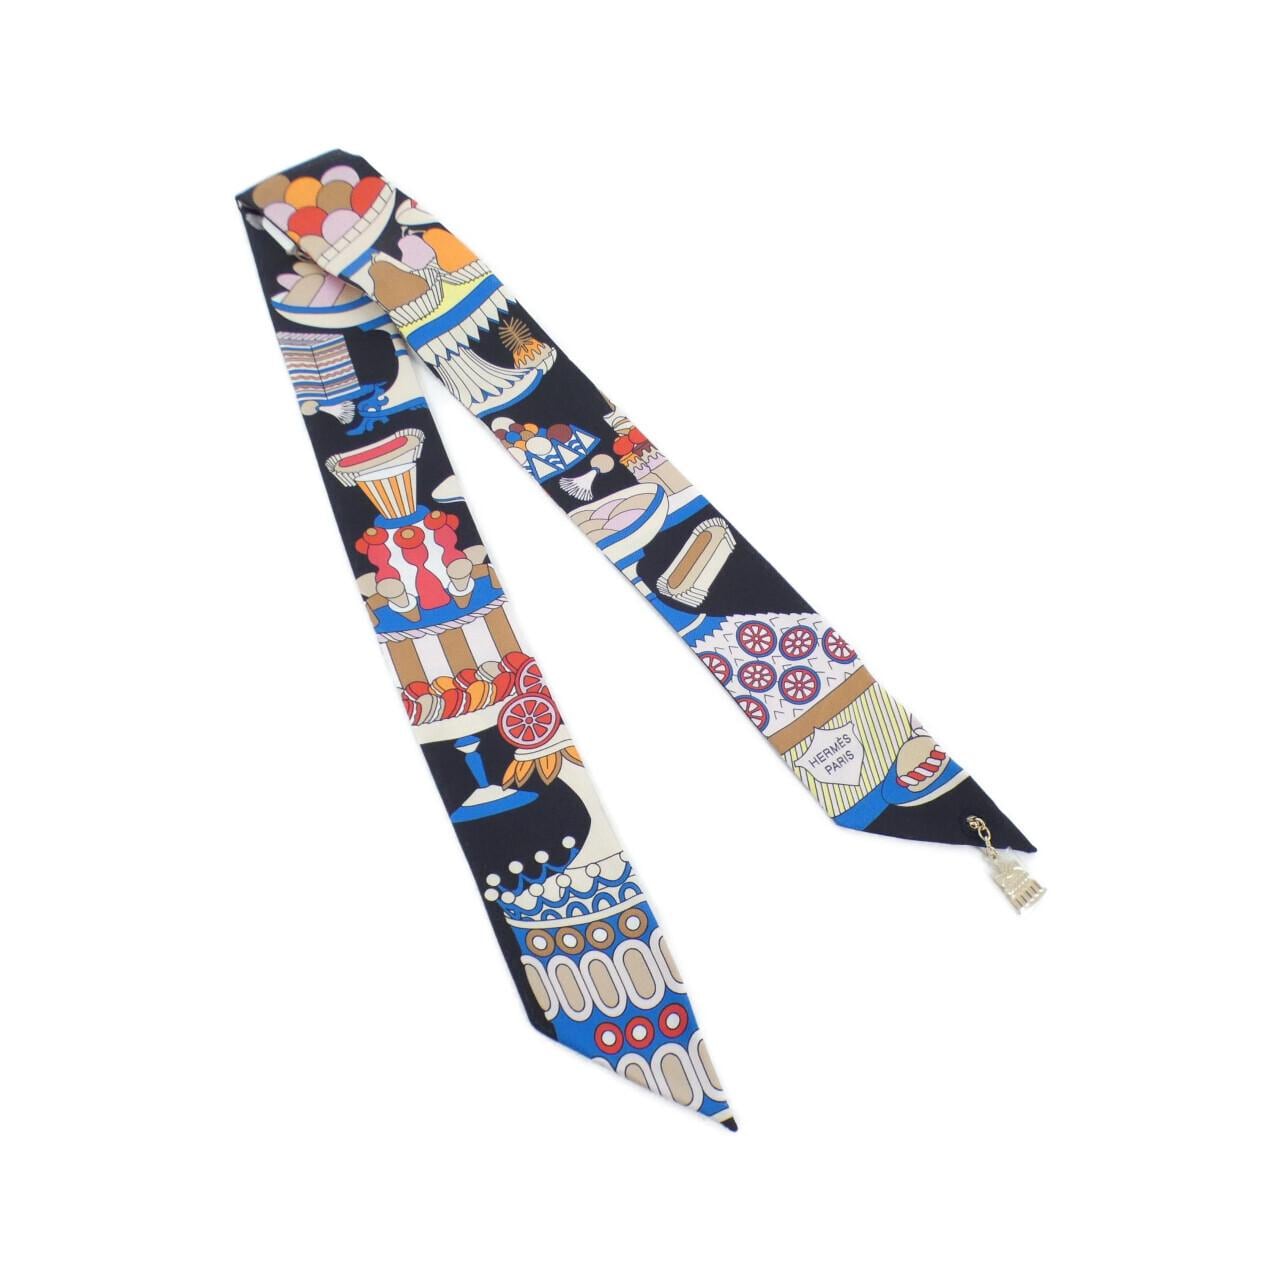 [Unused items] HERMES LA PATISSERIE FRANCAISE Twilly Charm 853336S Scarf